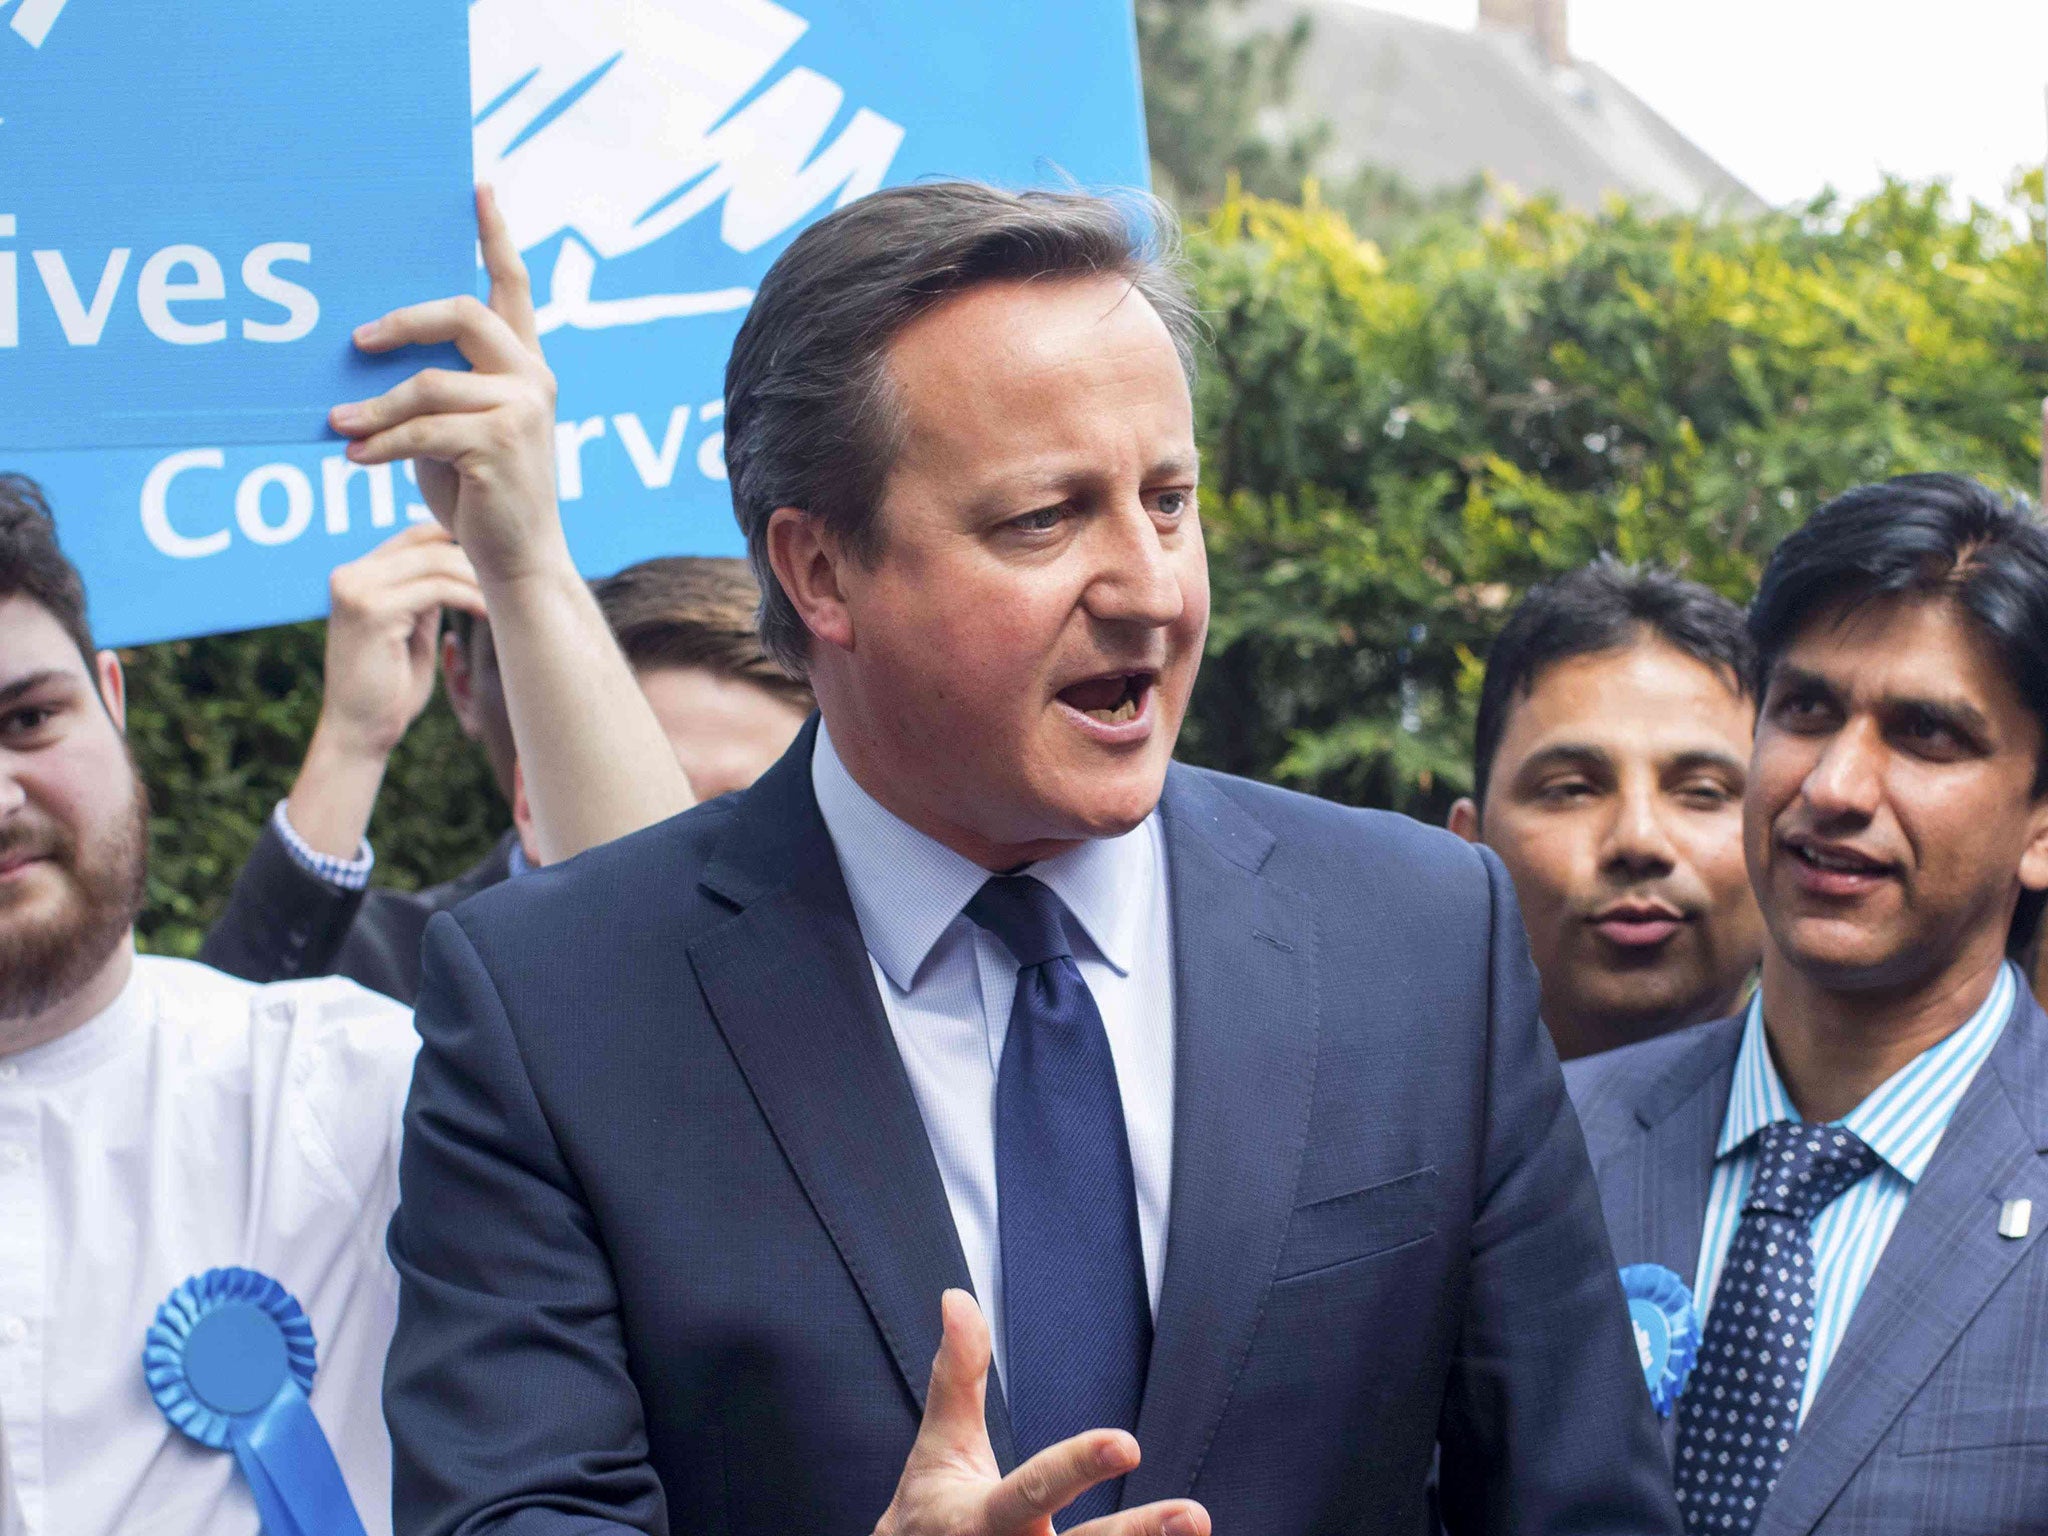 David Cameron yesterday said the independent probe showed Britain was 'uncorrupt'